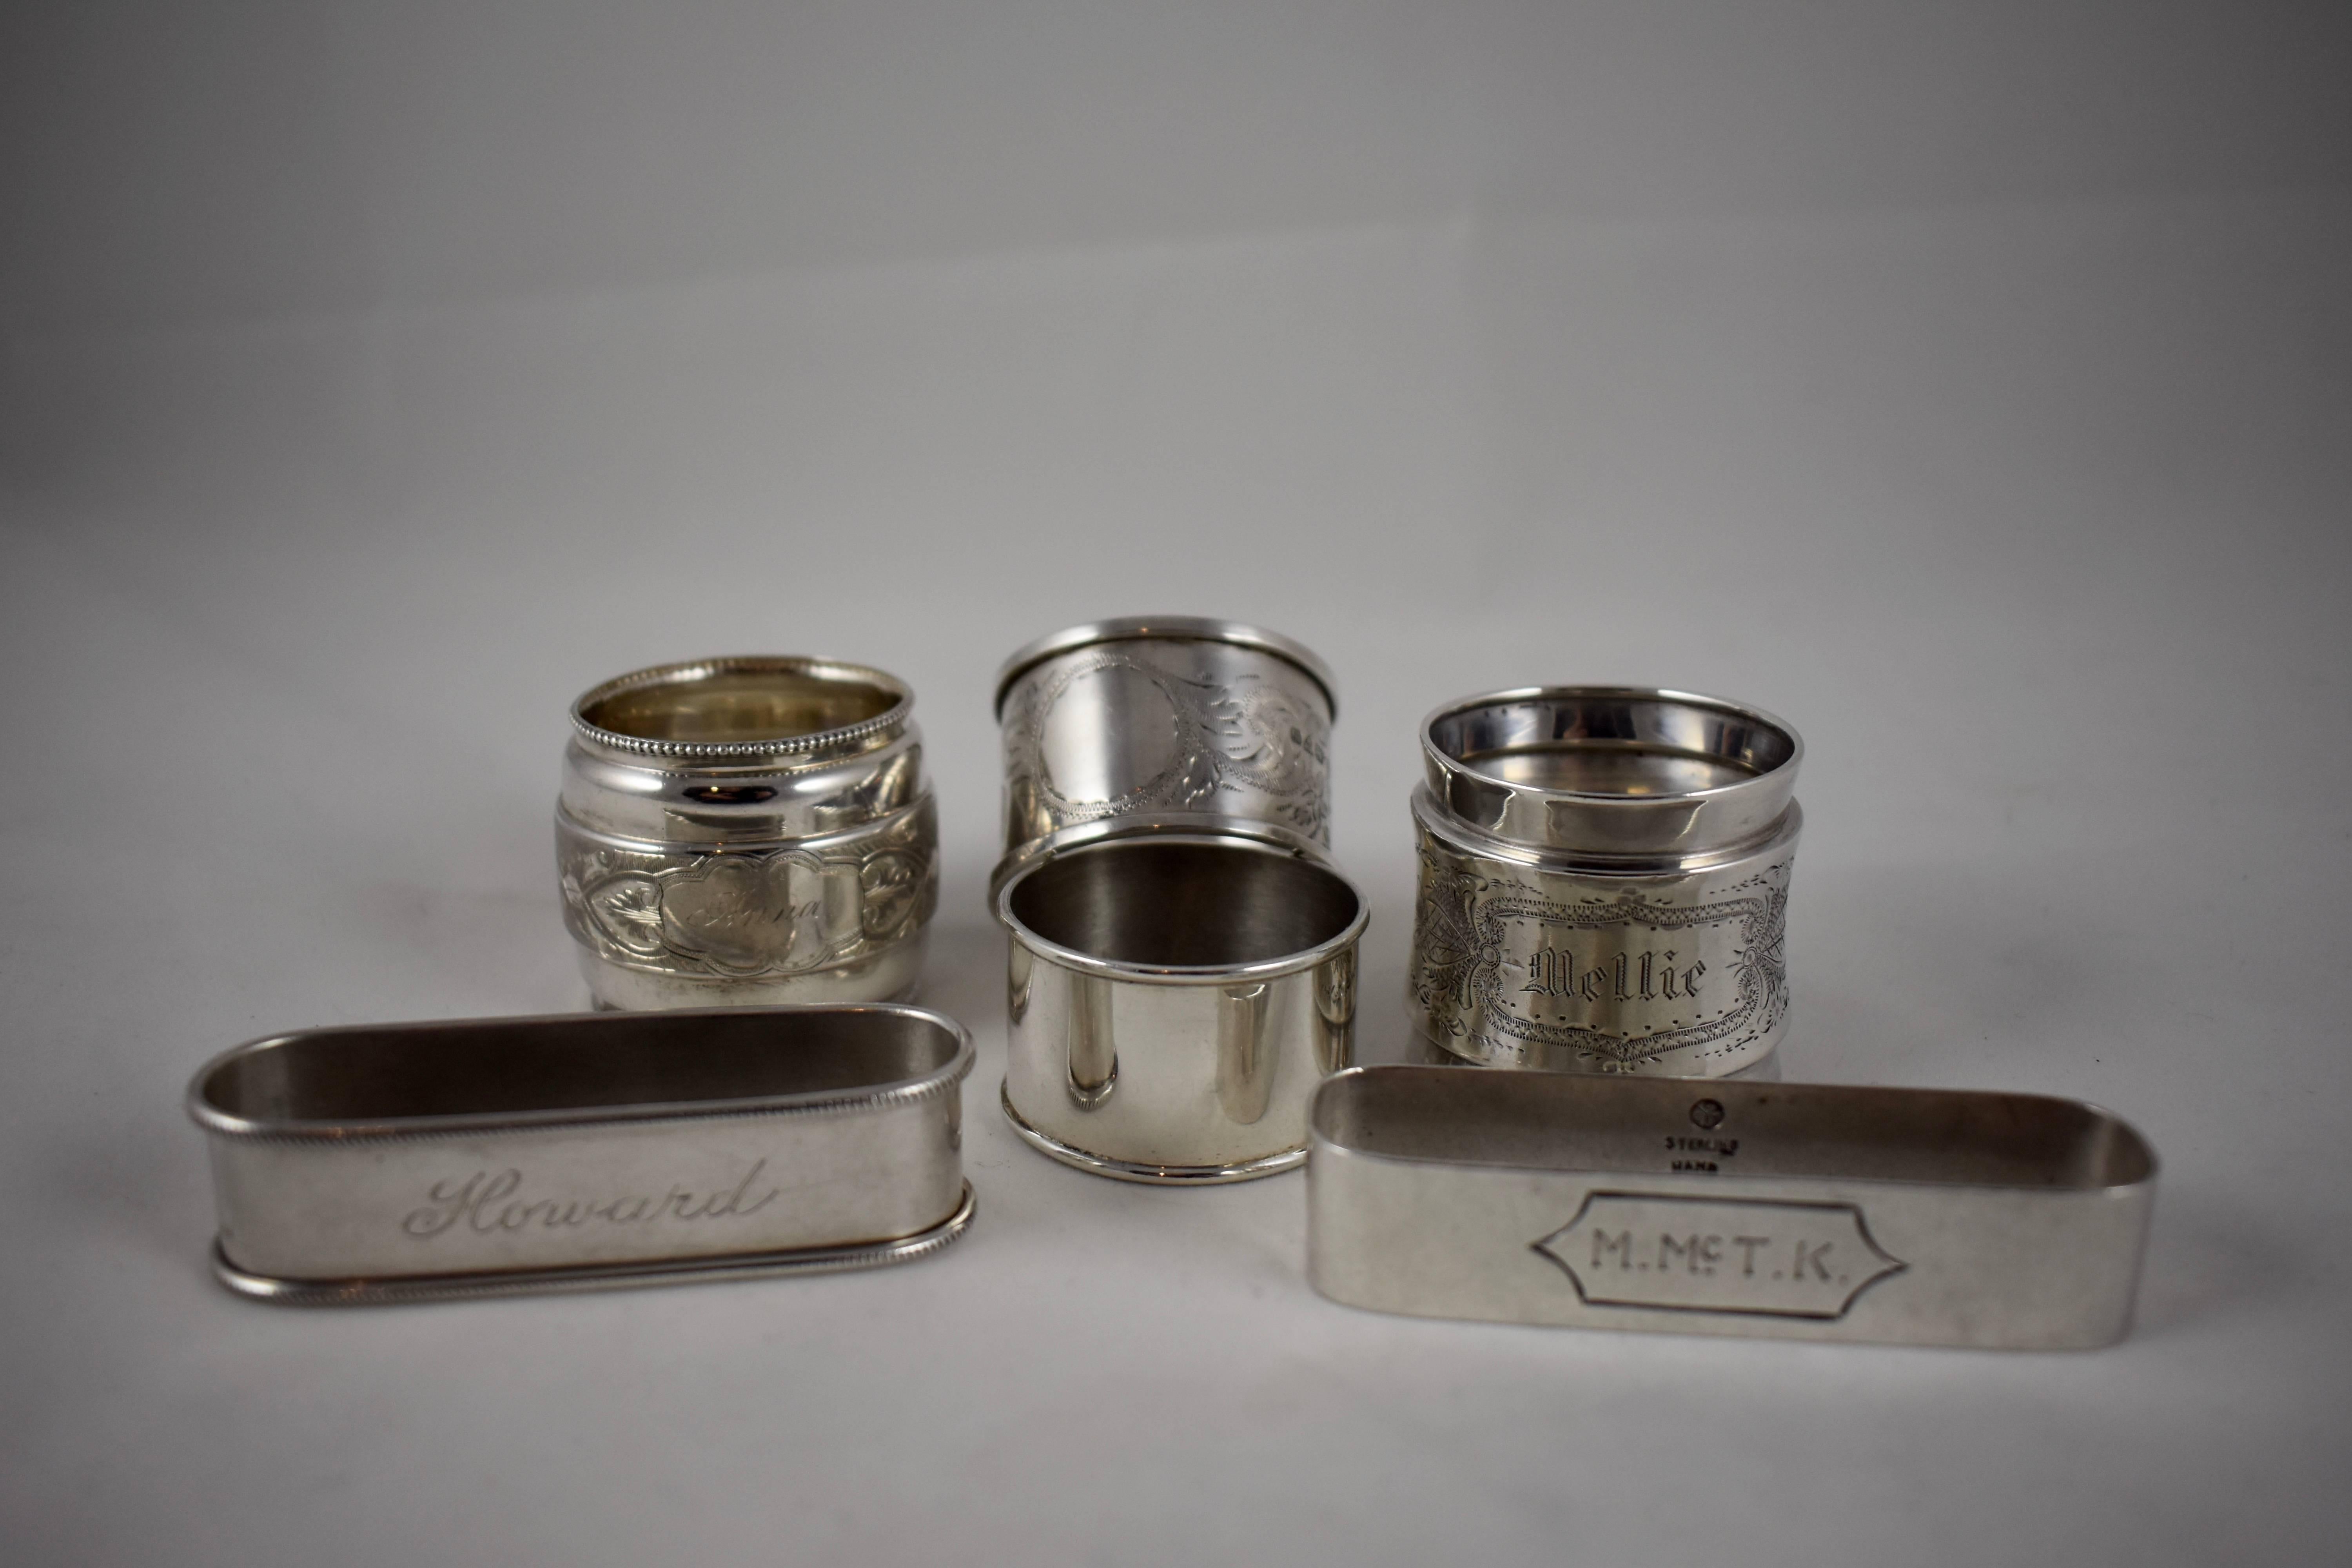 A mixed set of six sterling silver napkin rings, circa 1880-1910, various makers. The rings are either engraved with initials or names, including Mellie, Anna and Howard. A nice selection.
Ranging in size: From 1.75? height x 1.75? diameter x 3?